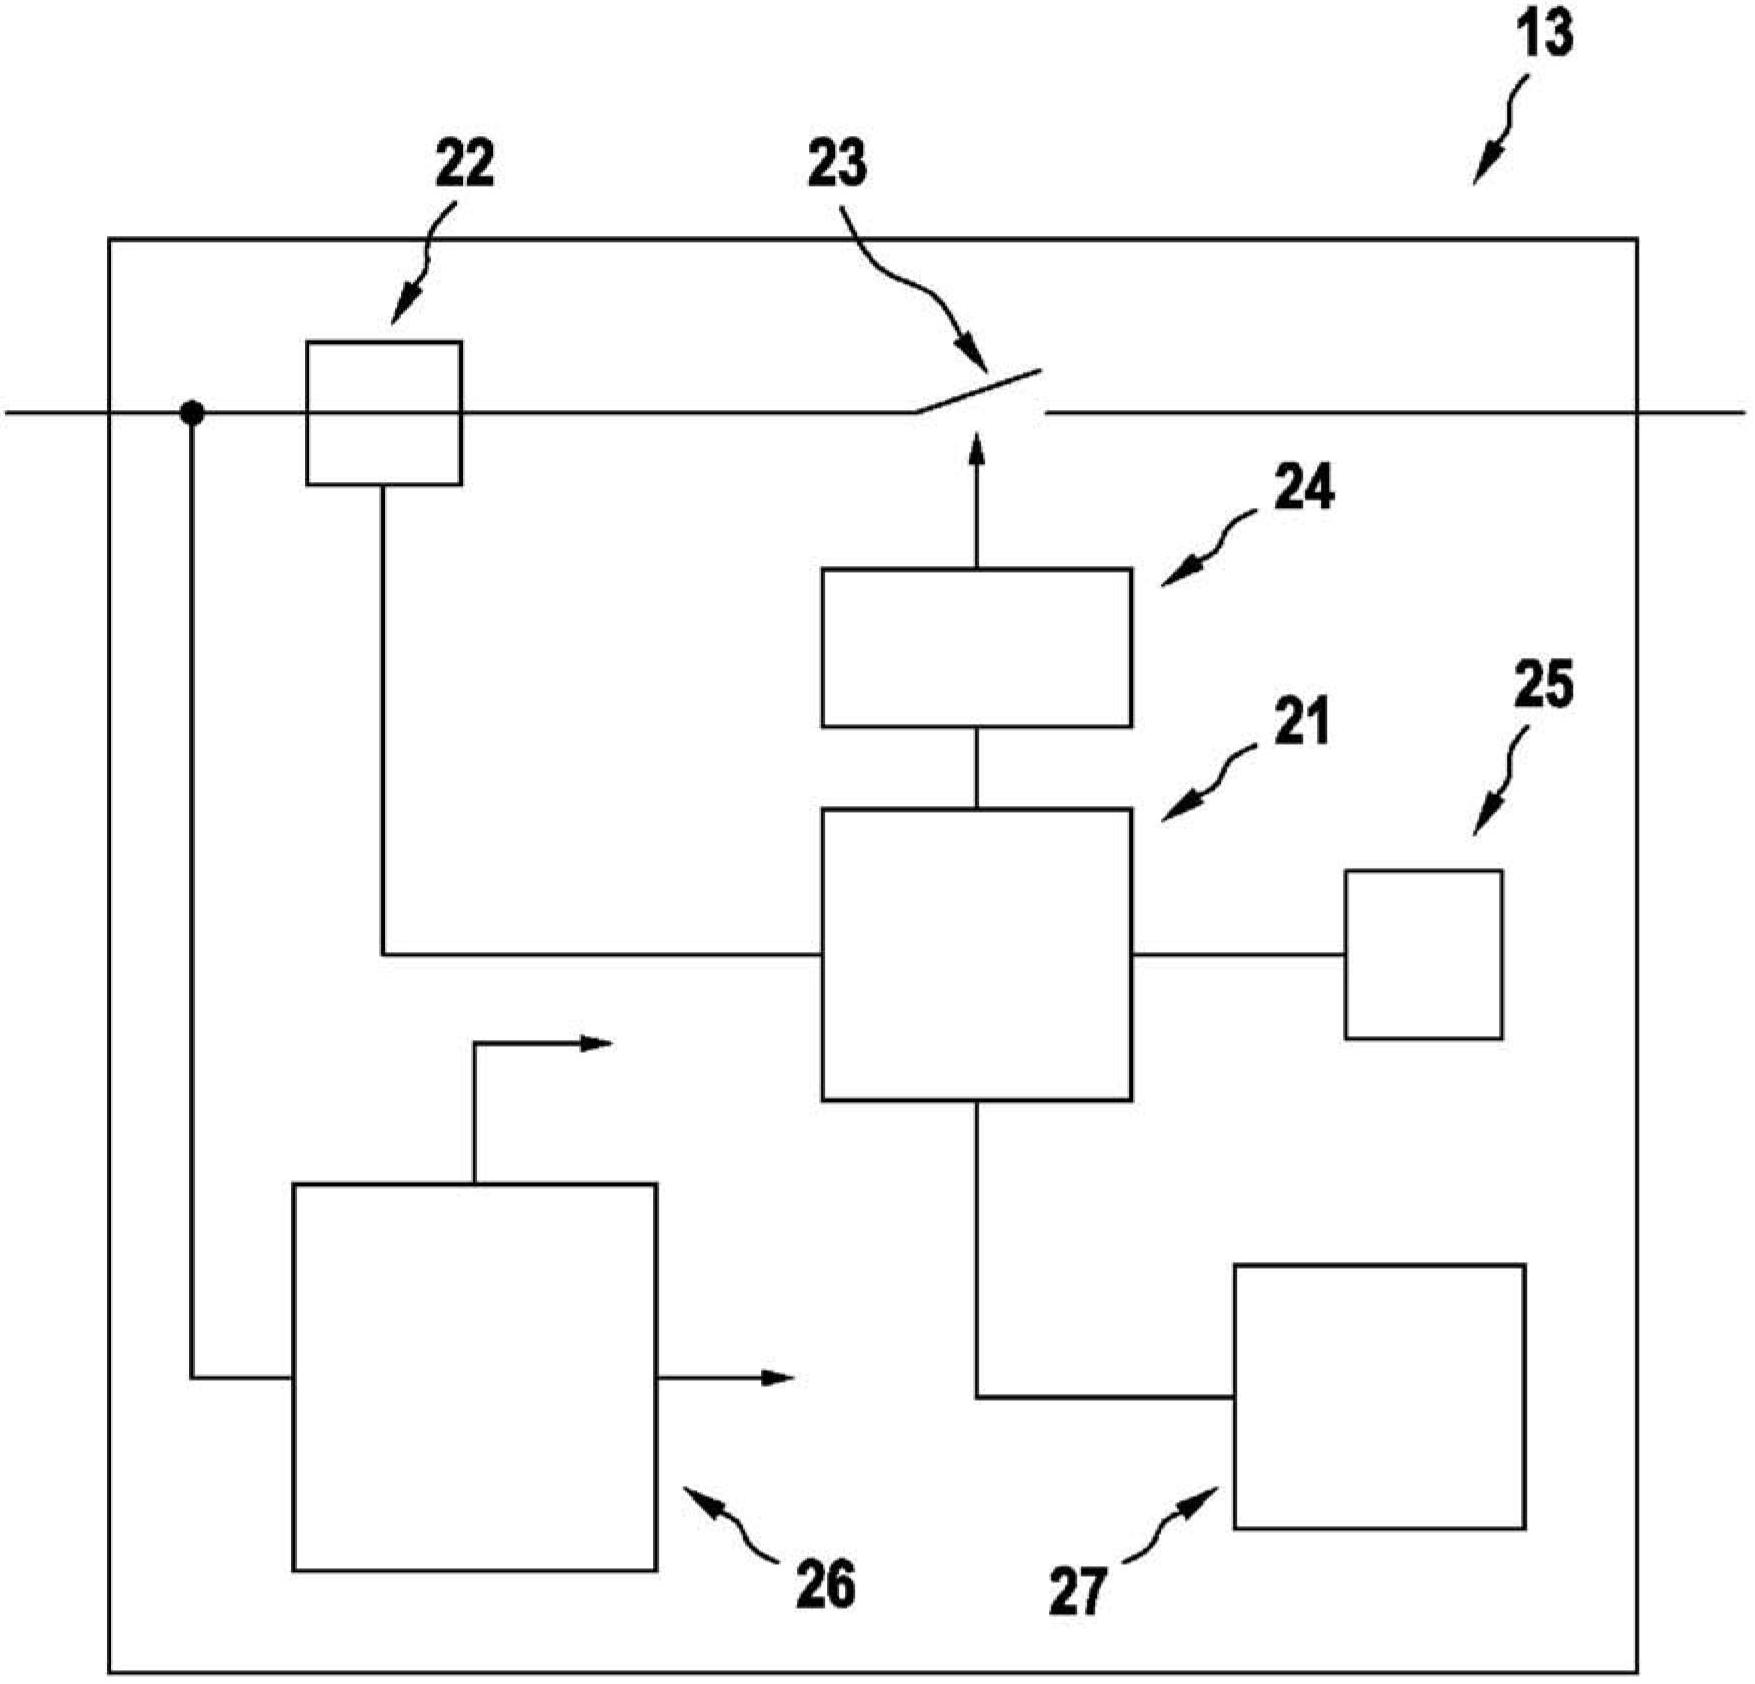 Component for limiting currents in electric circuits